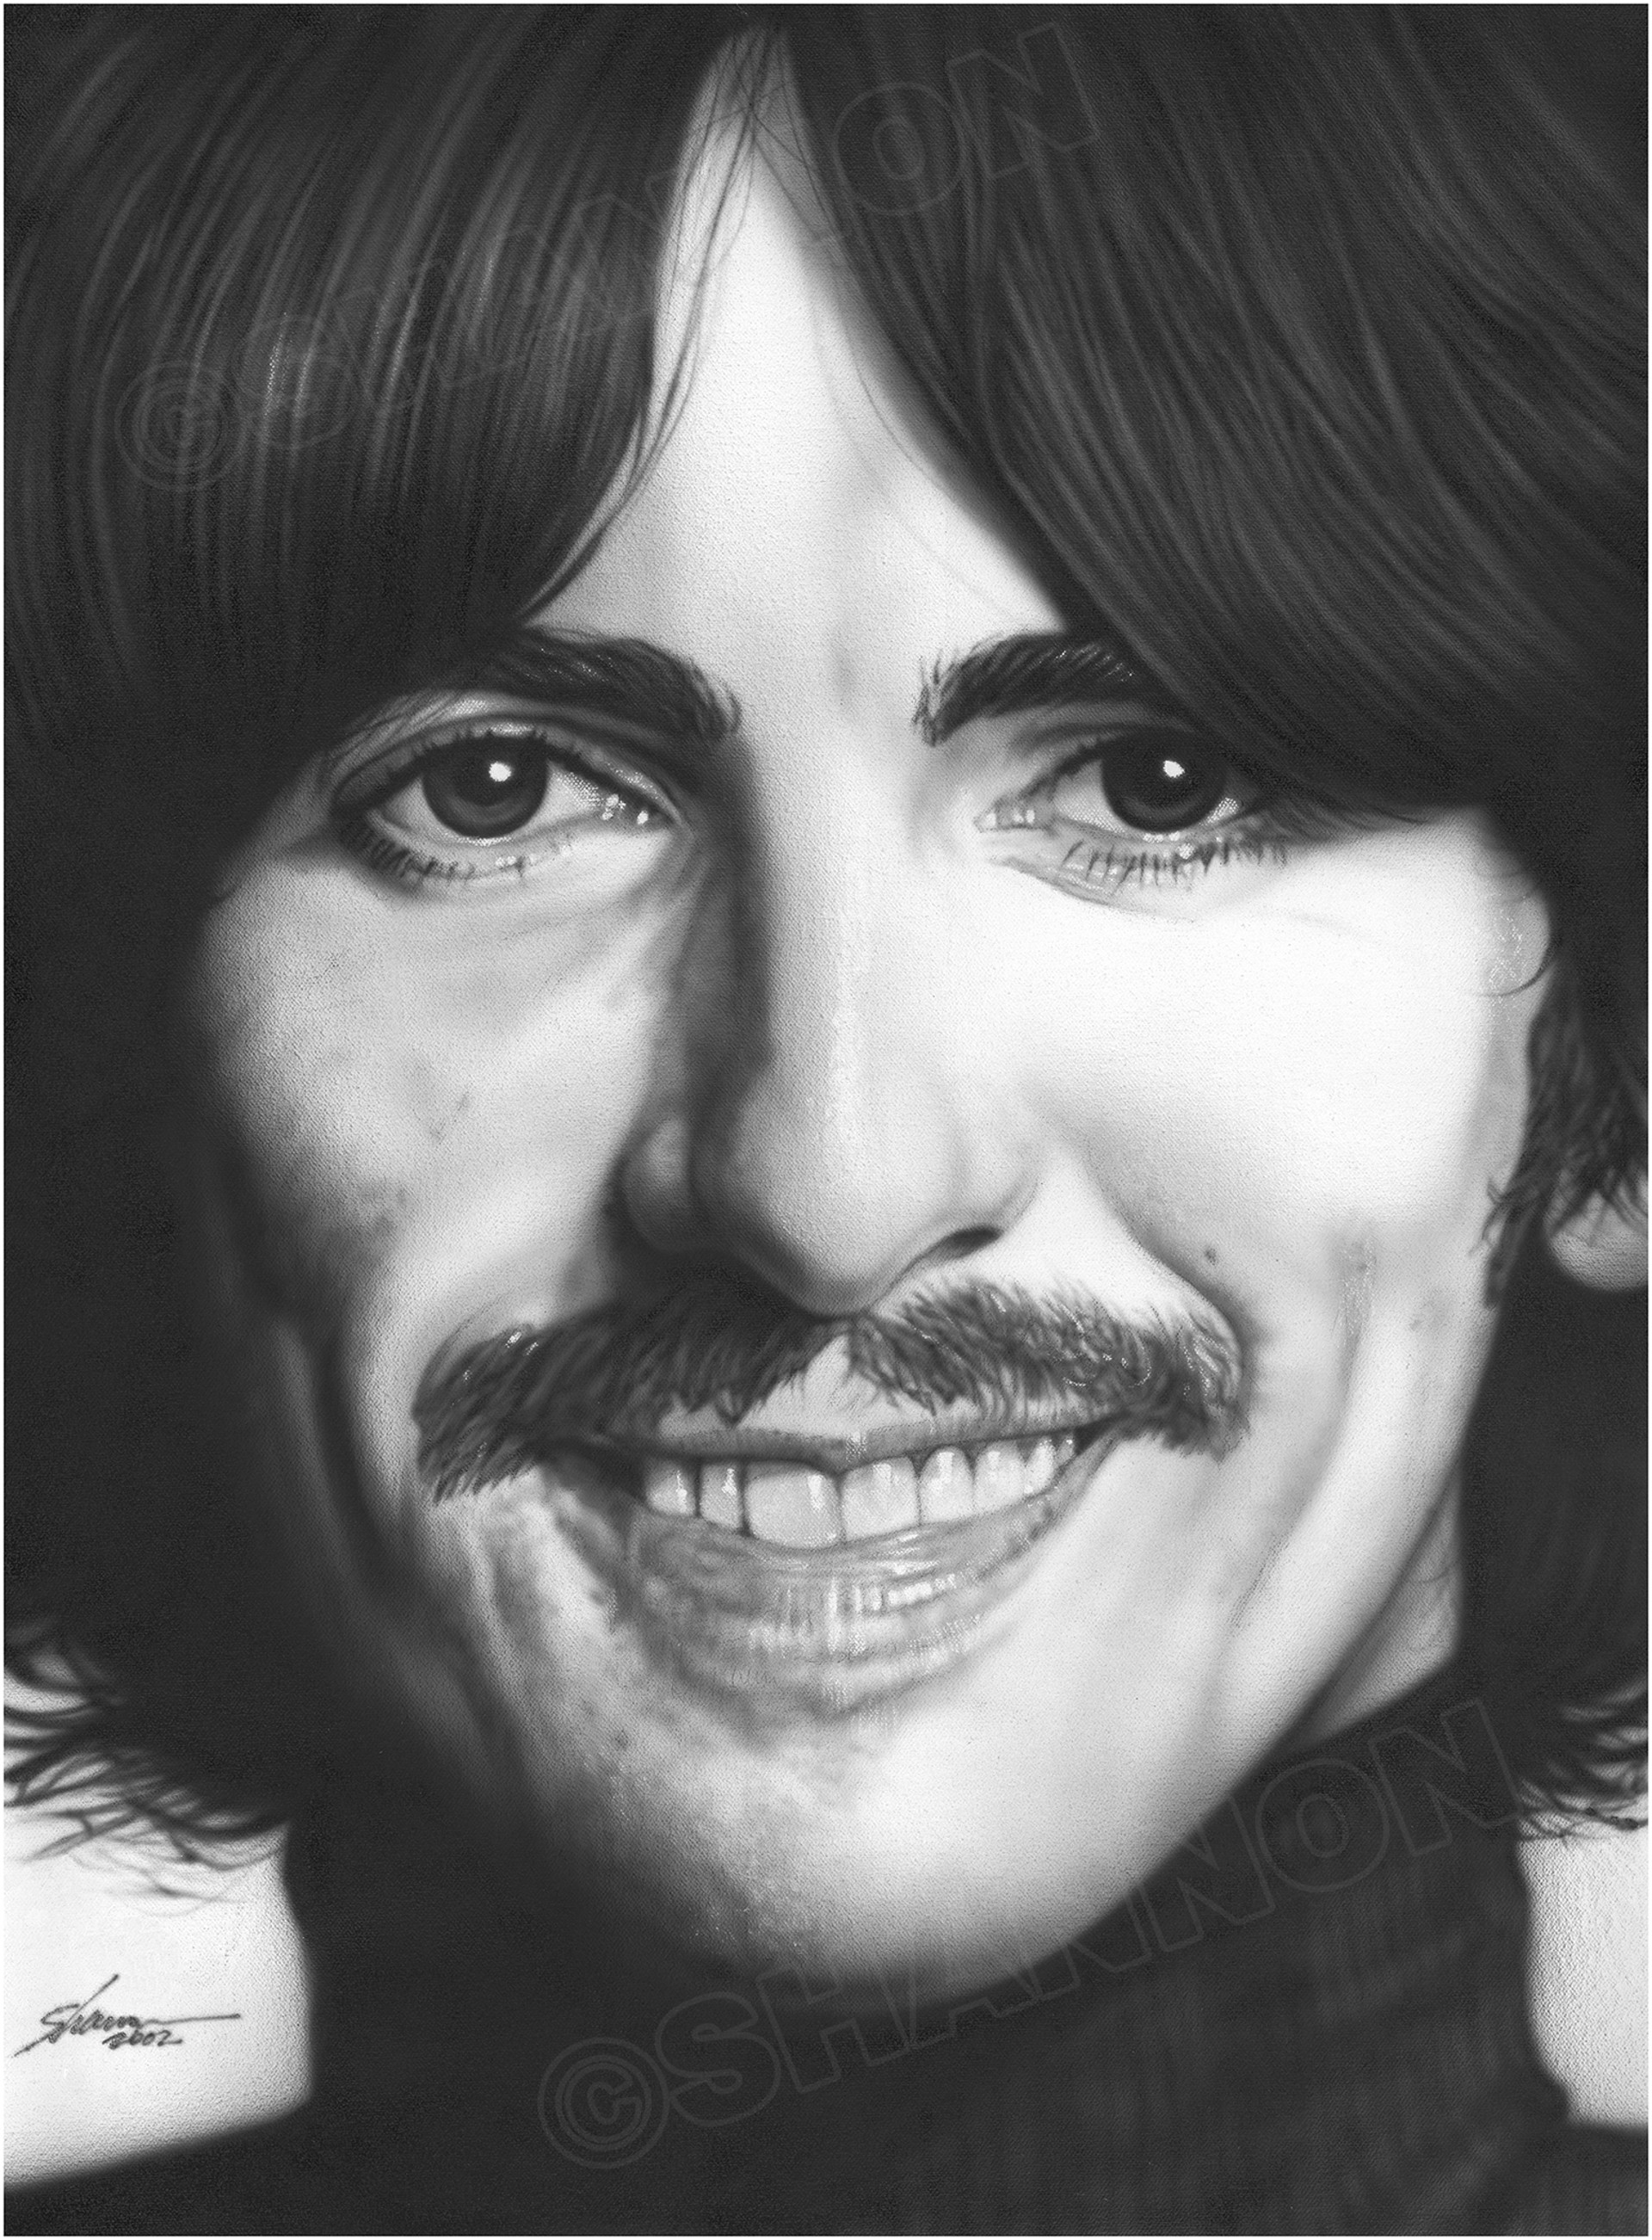 My Sweet George by Shannon MacDonald The World's Greatest Beatles Artist